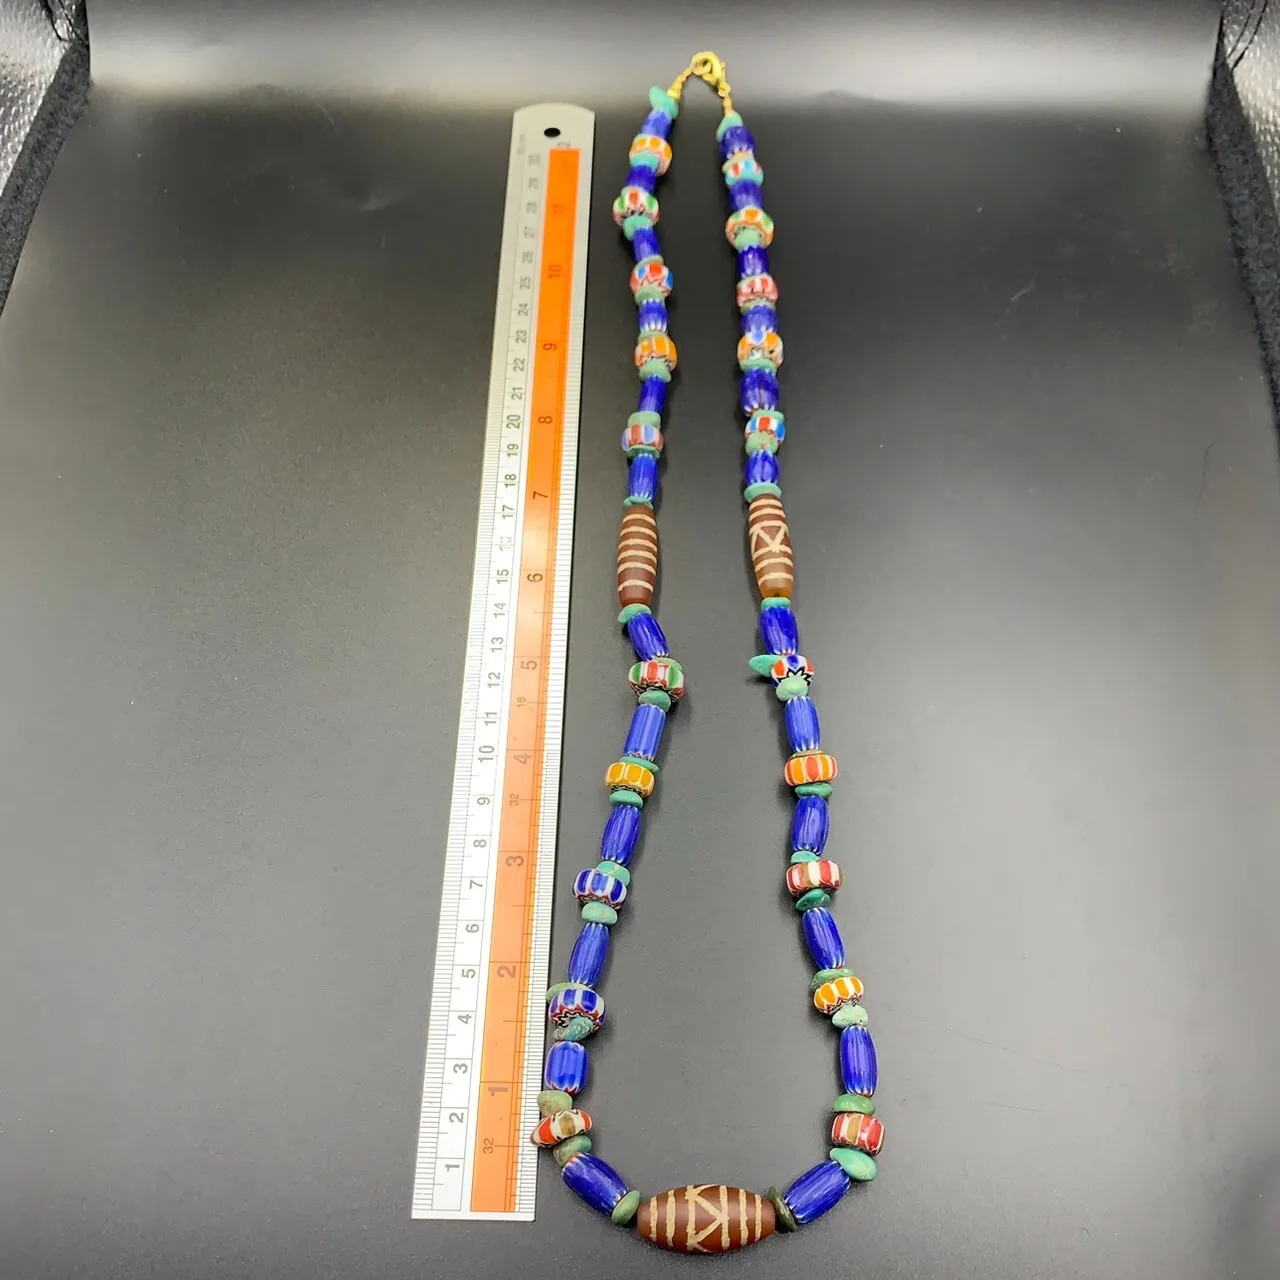 Beautiful Chevron Trade Glass Beads With Antique Etched Agate Beads Necklace, LBBR-30 - Image 5 of 6